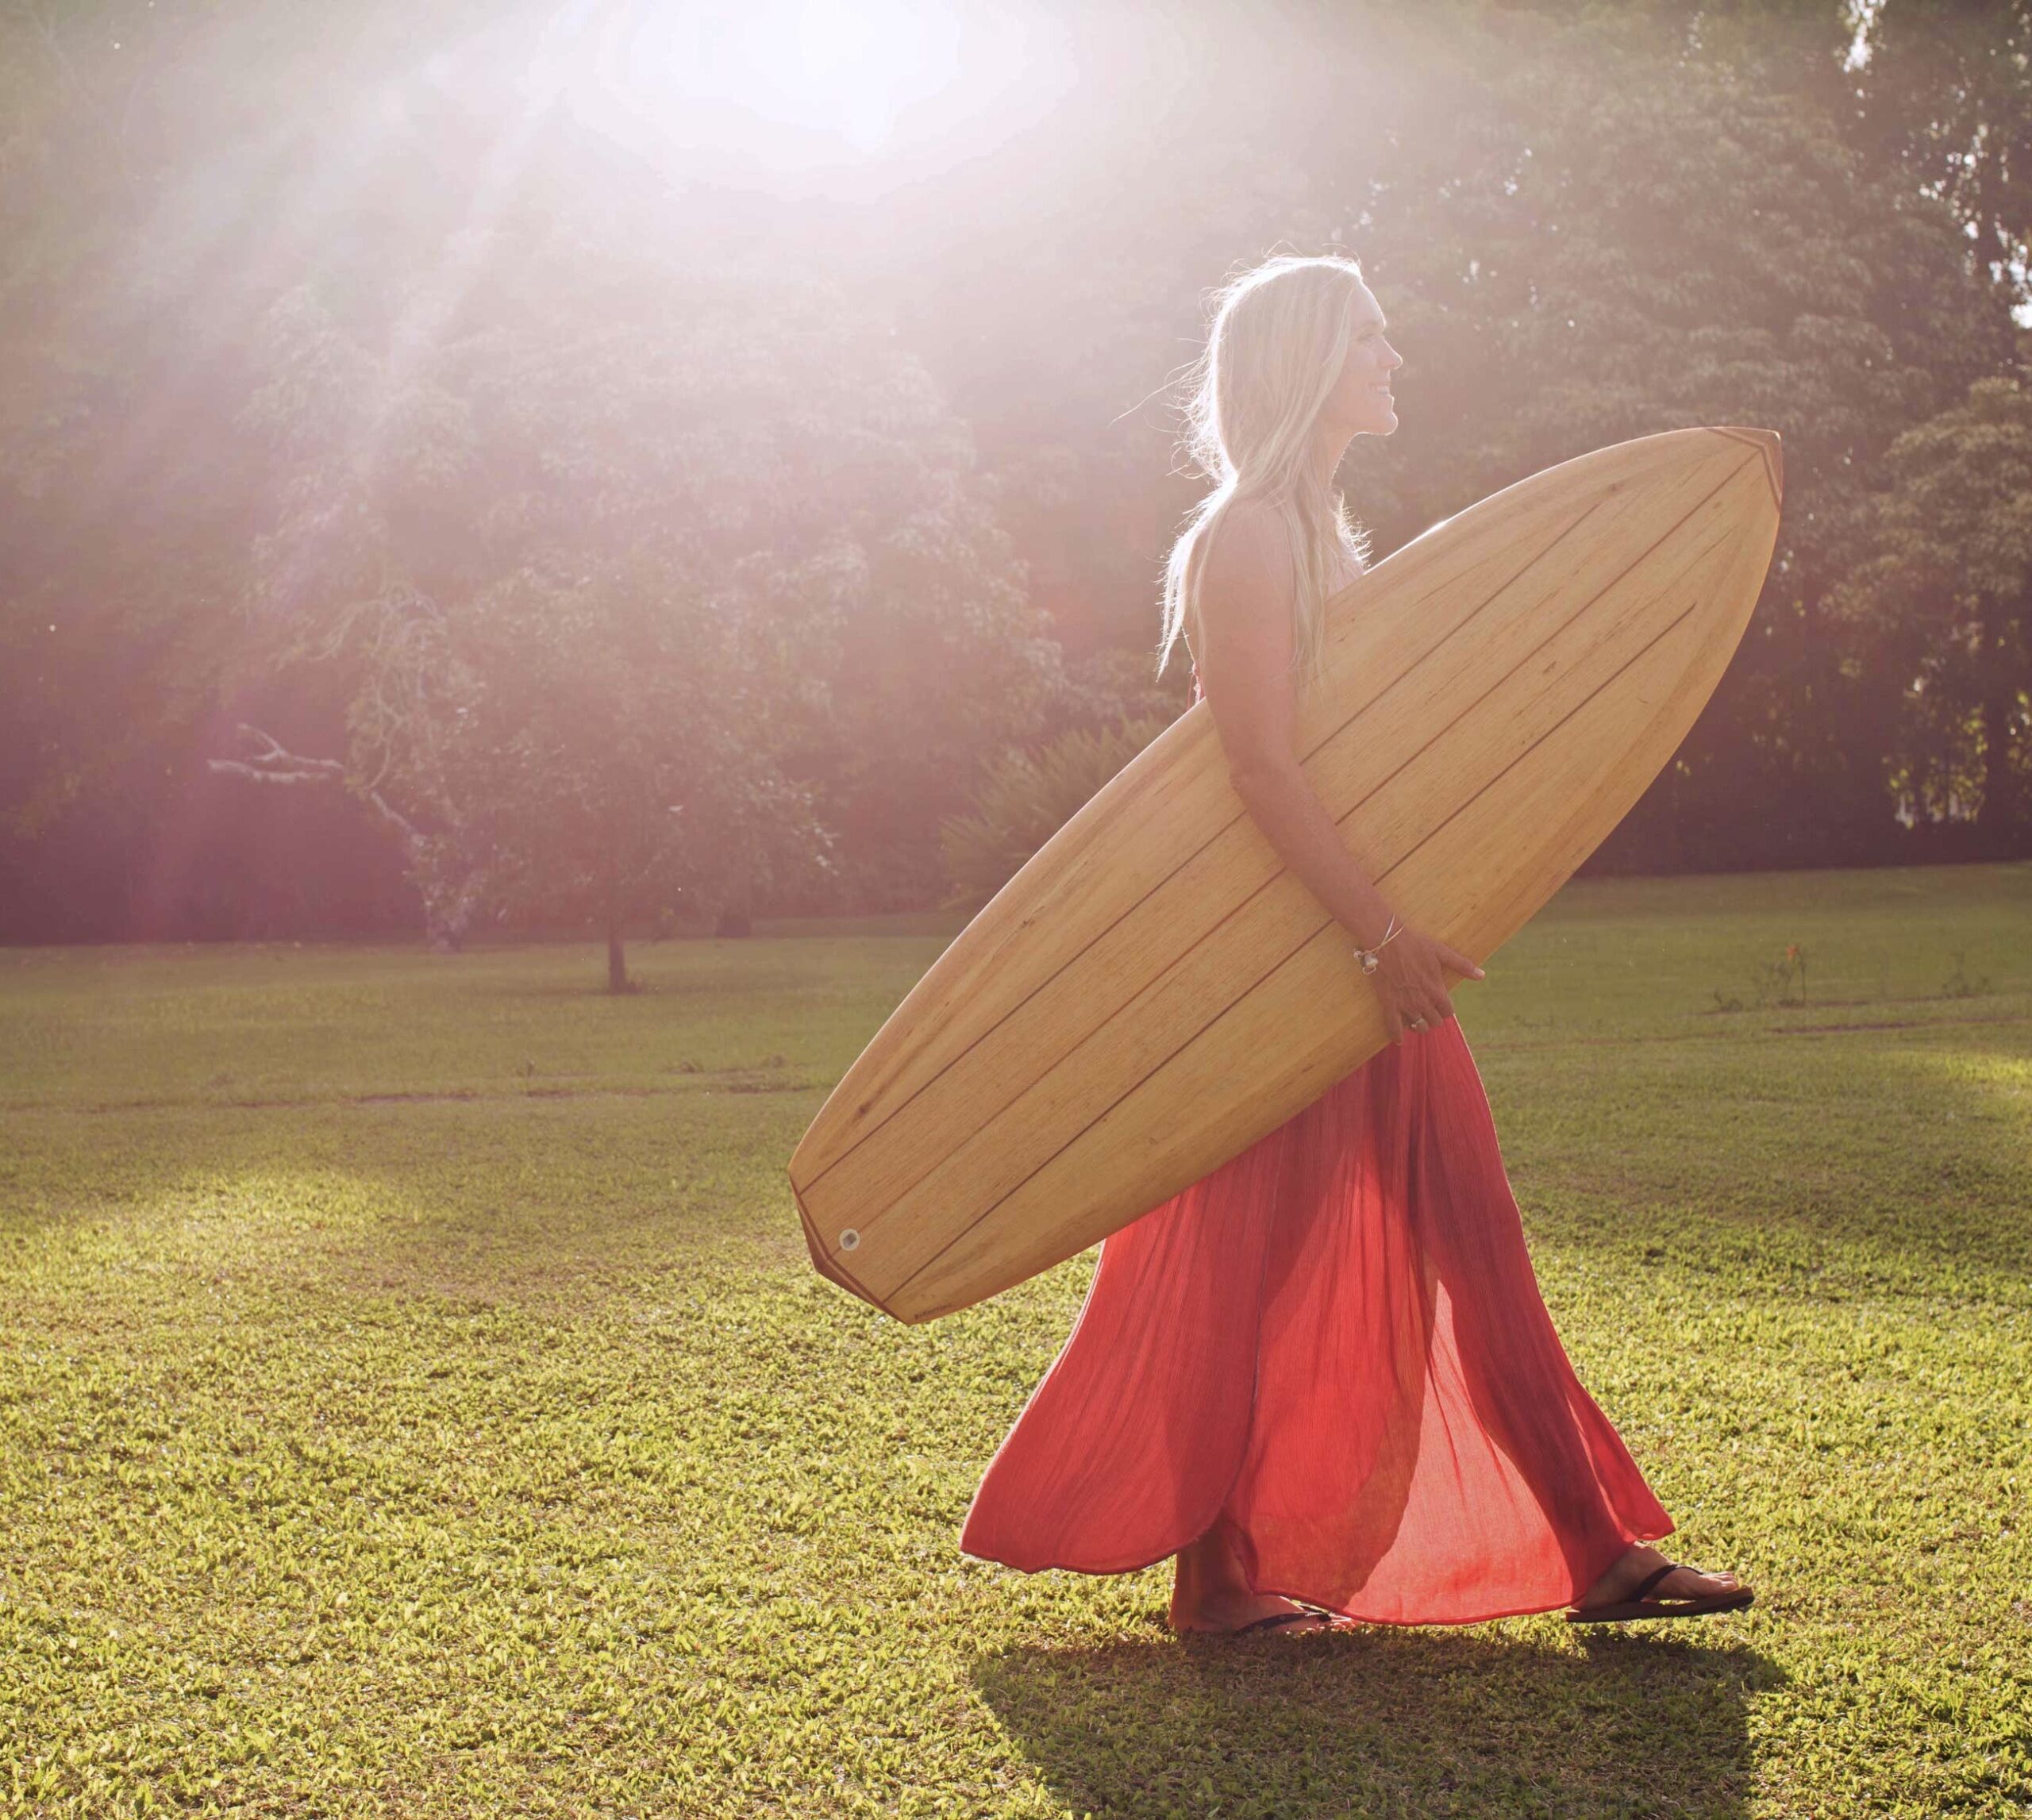 Bethany walks through the grass with a wooden surfboard under her arm.